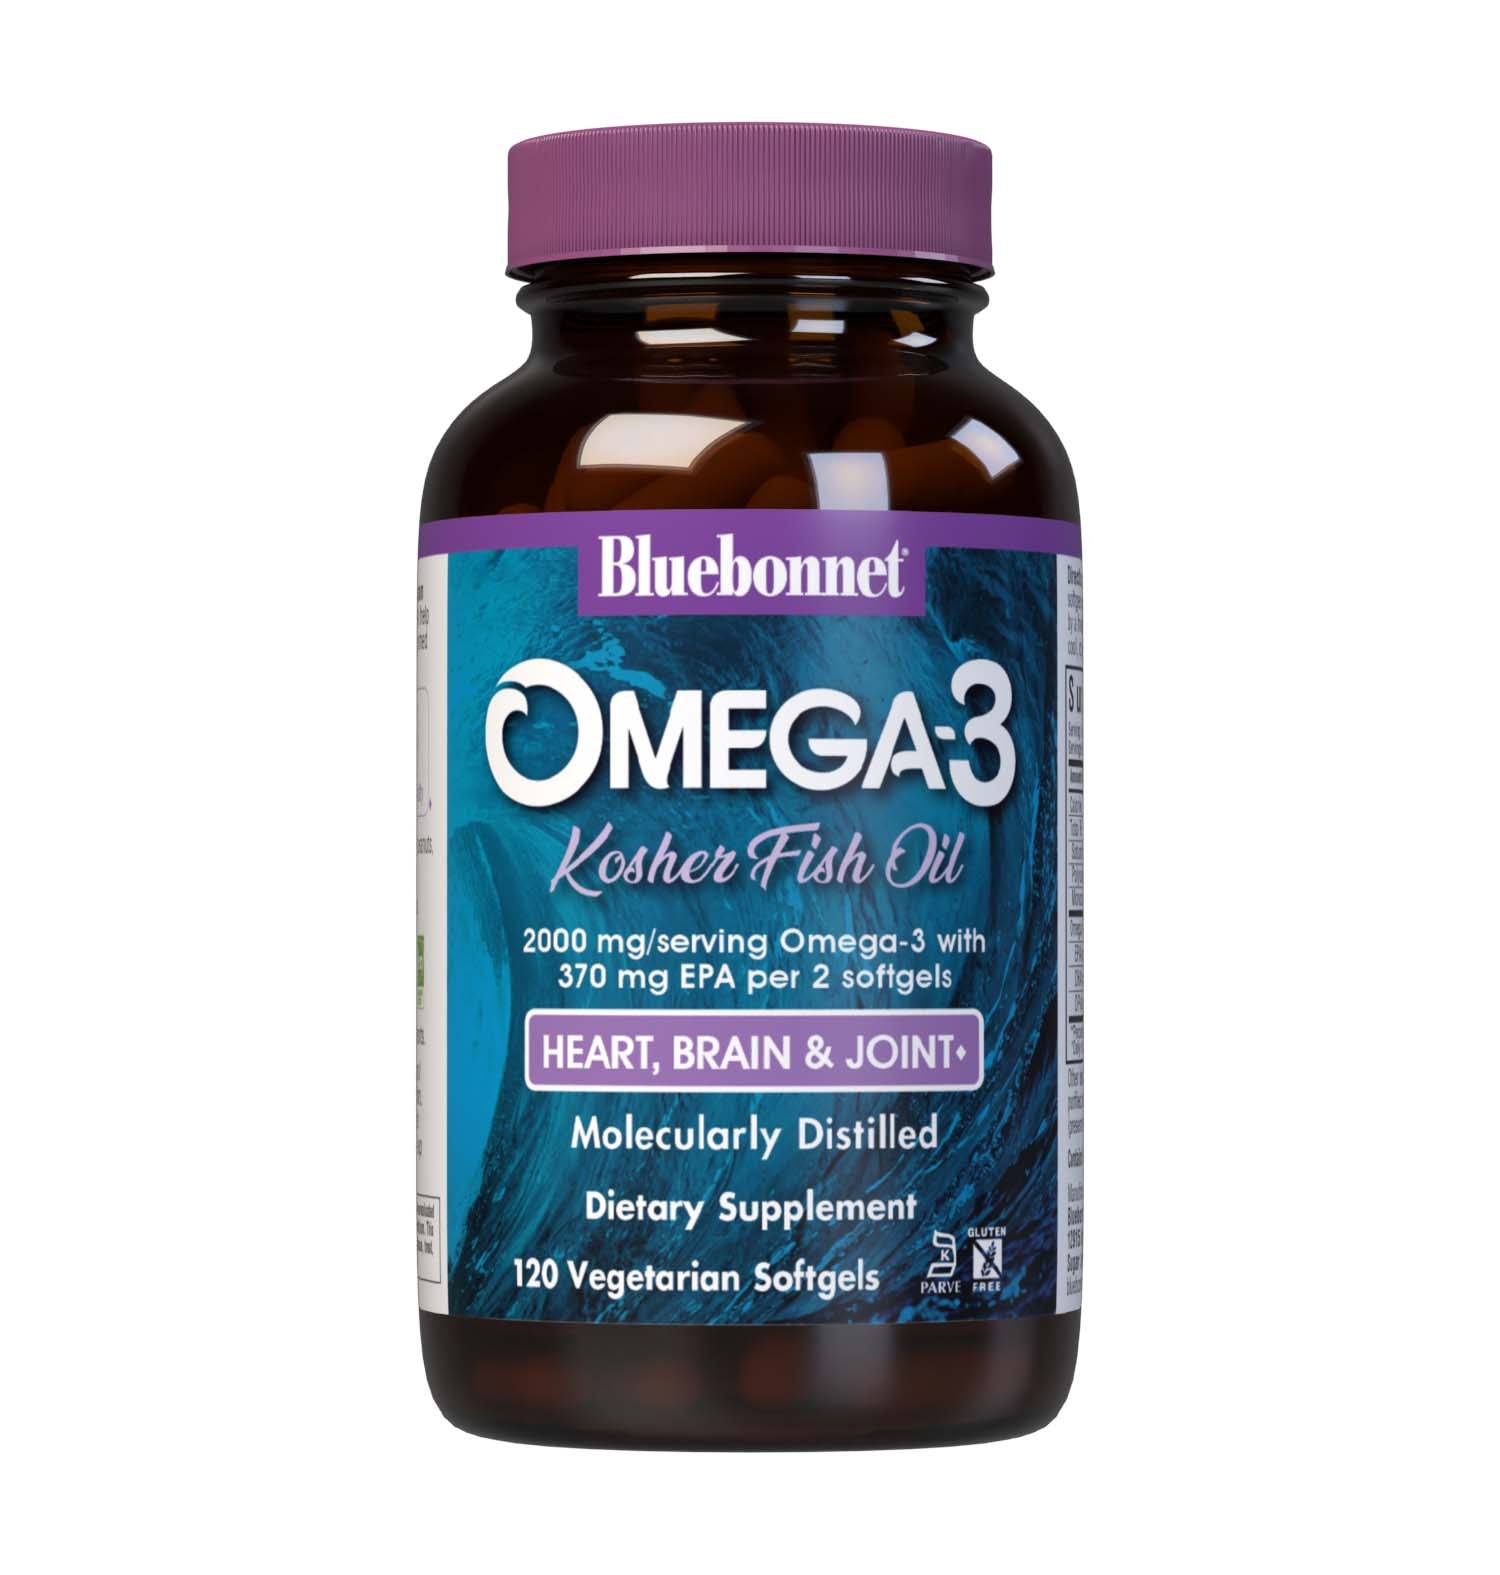 Omega-3 Kosher Fish Oil 120 Vegetarian Softgels are formulated with EPA, DHA and DPA to help support heart, brain and joint health by utilizing refined omega-3s from wild ocean fish. #size_120 count